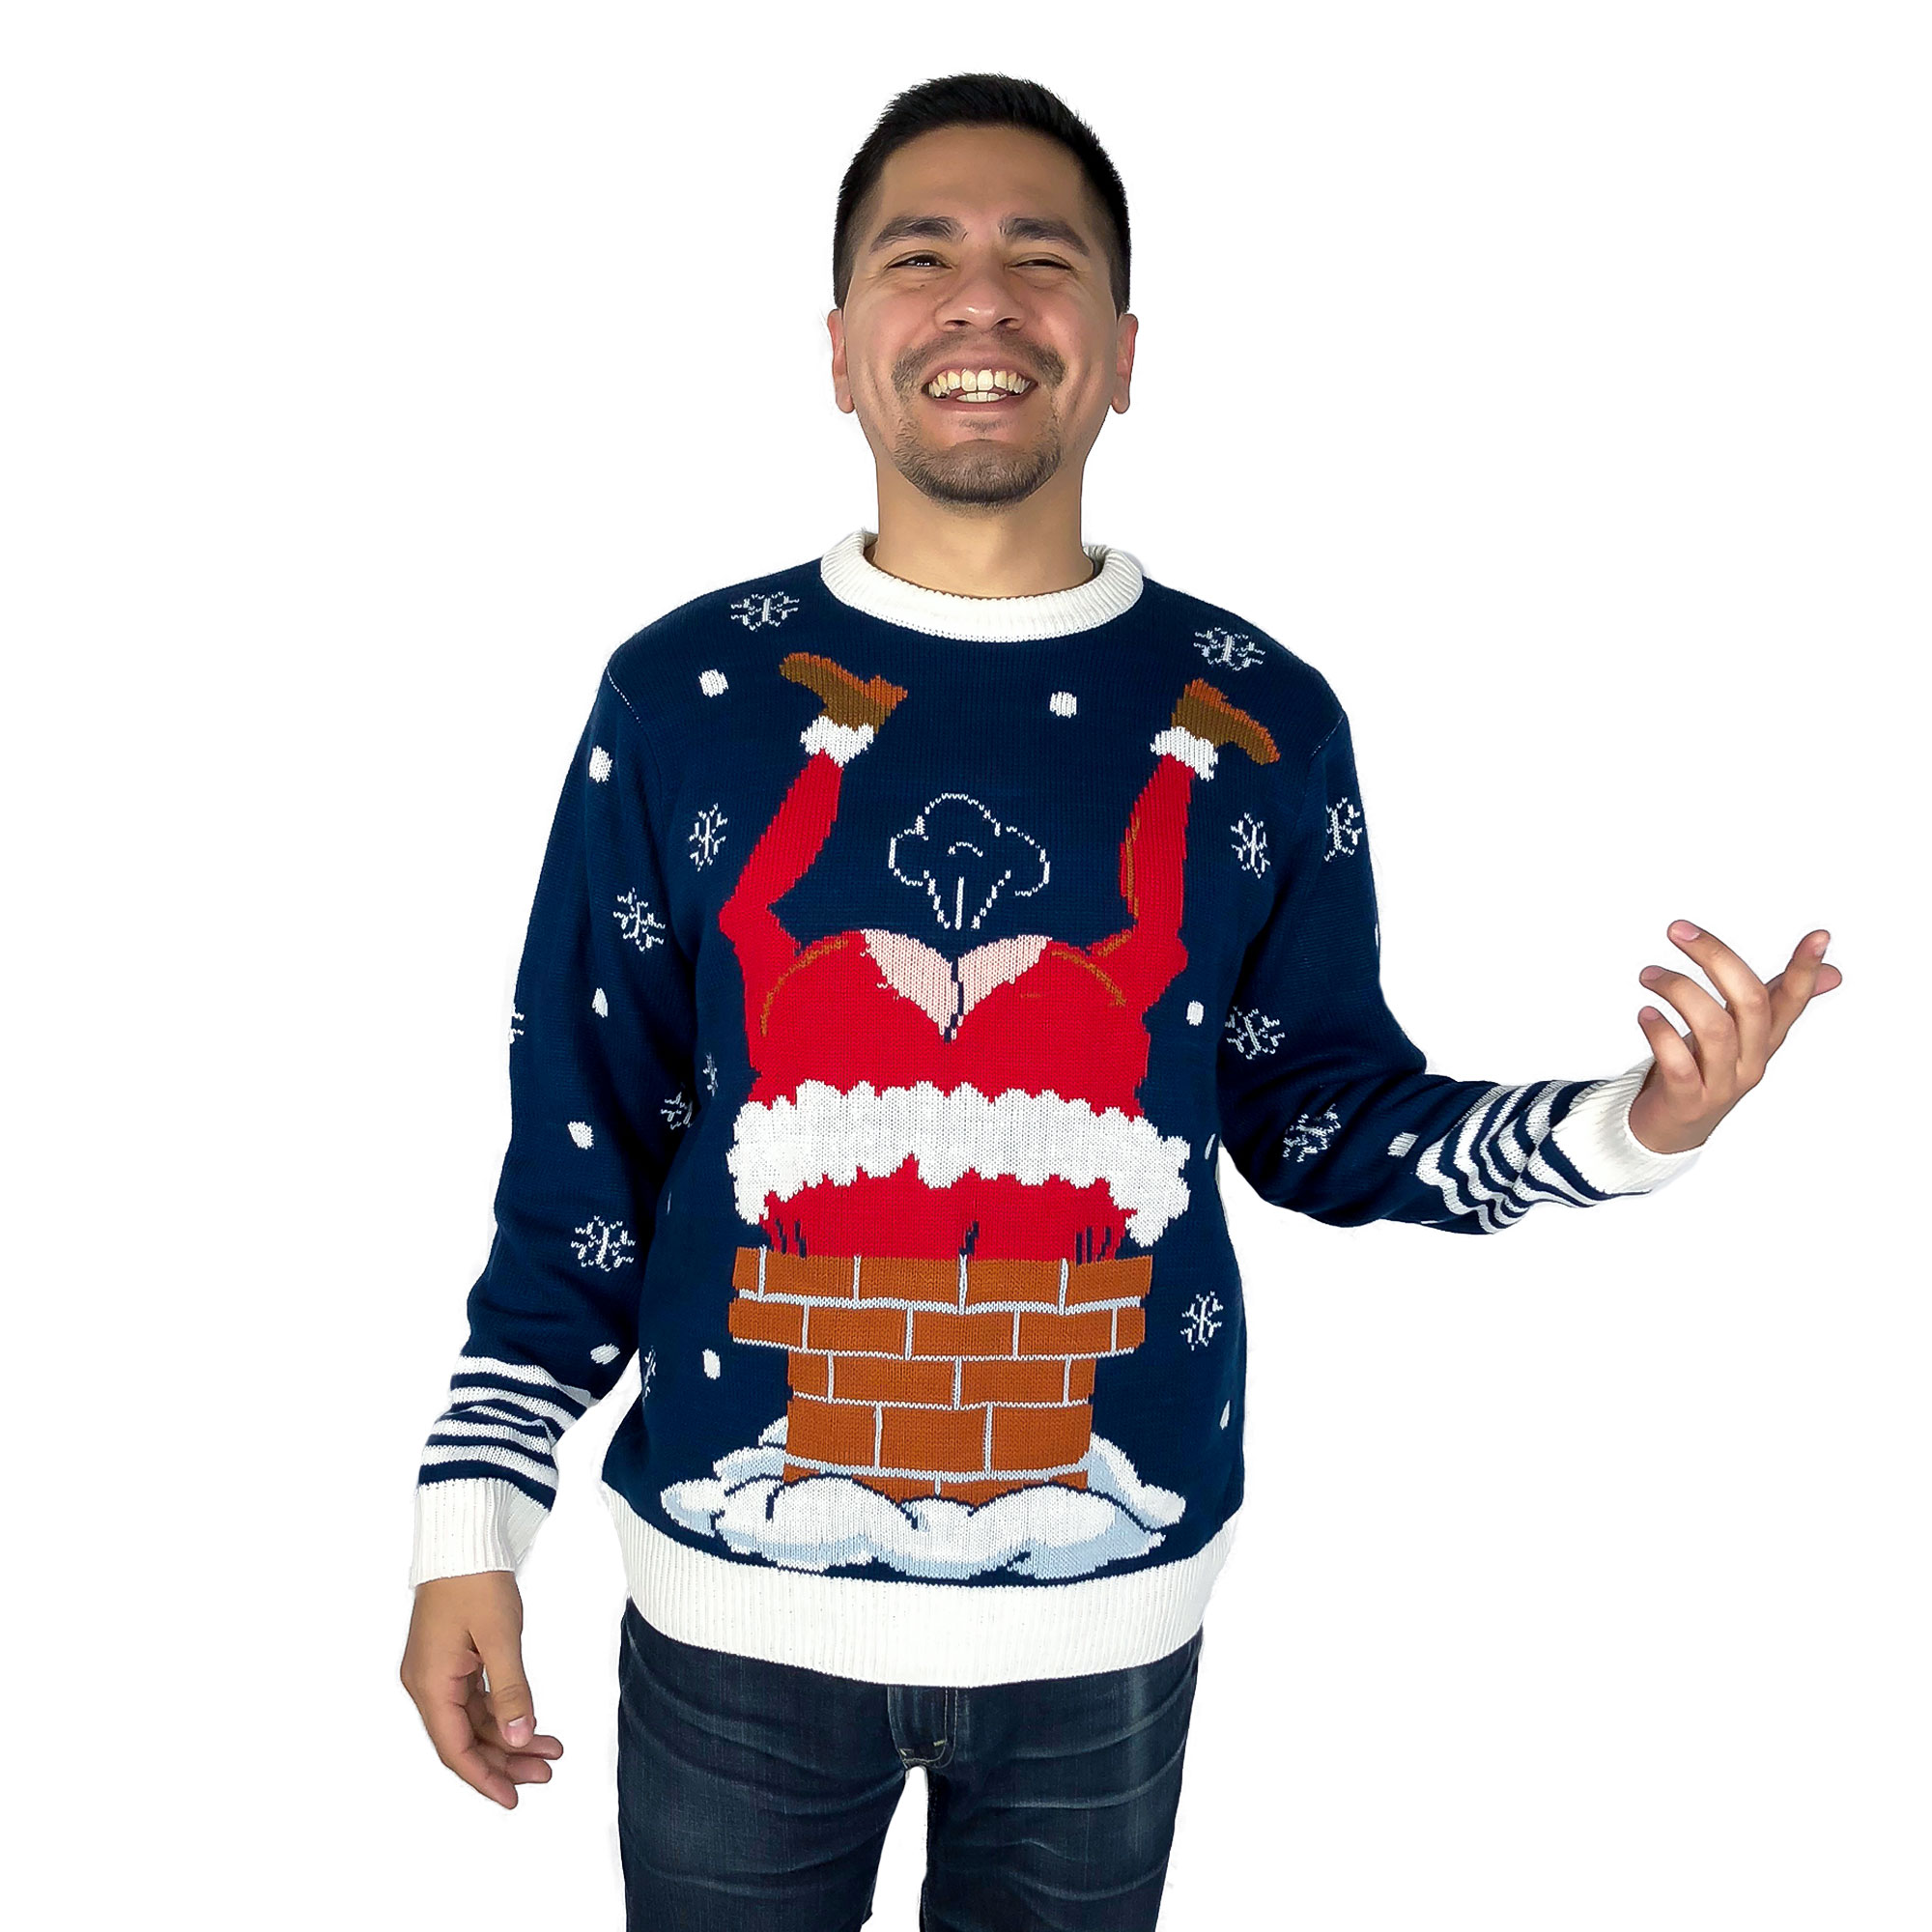 Gassy Sweater Ugly Christmas Sweater